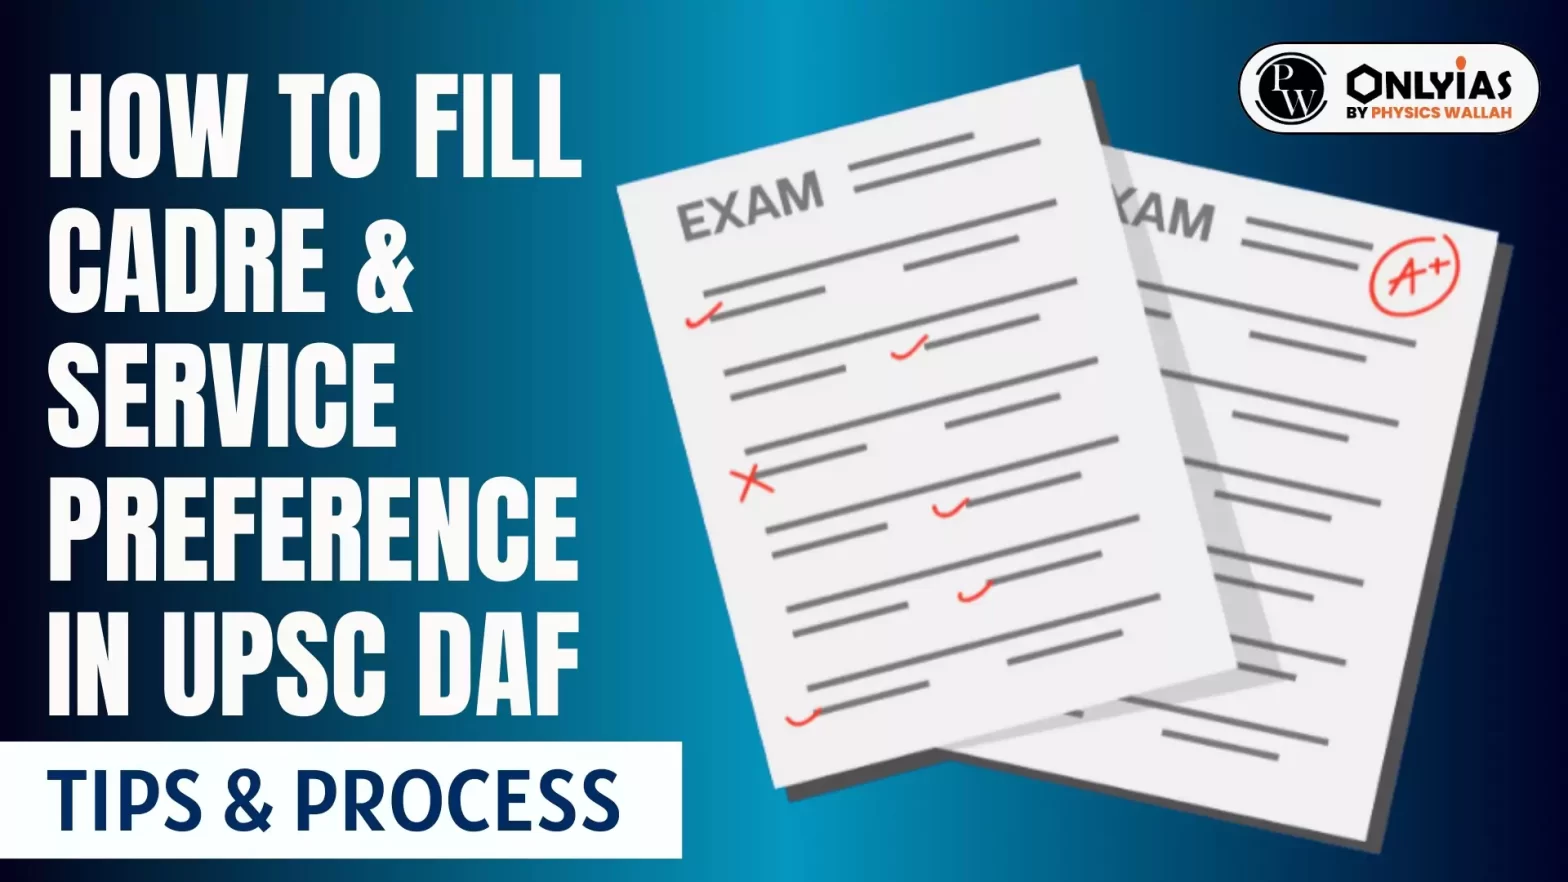 How To Fill Cadre & Service Preference in UPSC DAF: Tips & Process